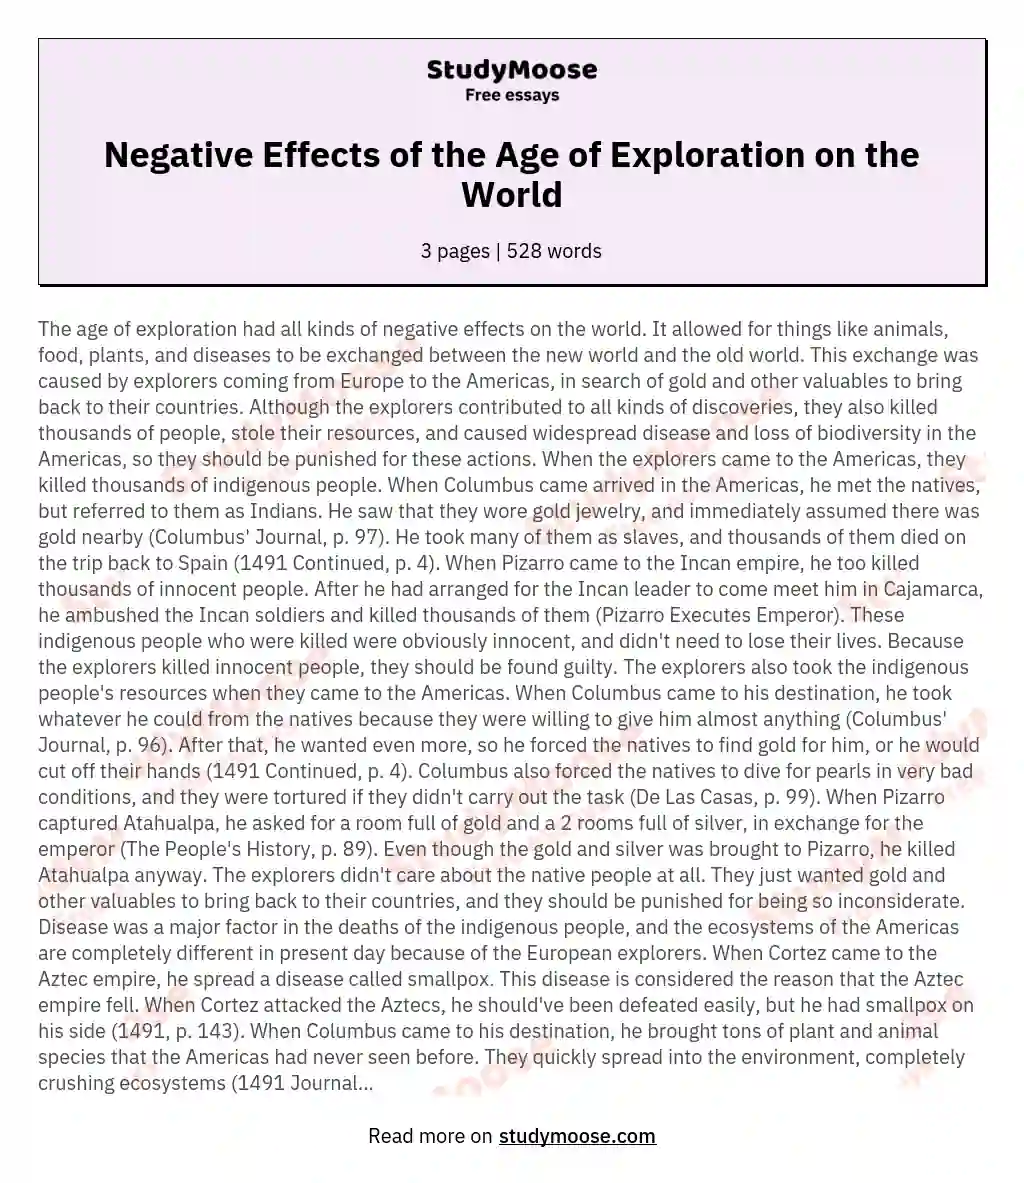 Negative Effects of the Age of Exploration on the World essay